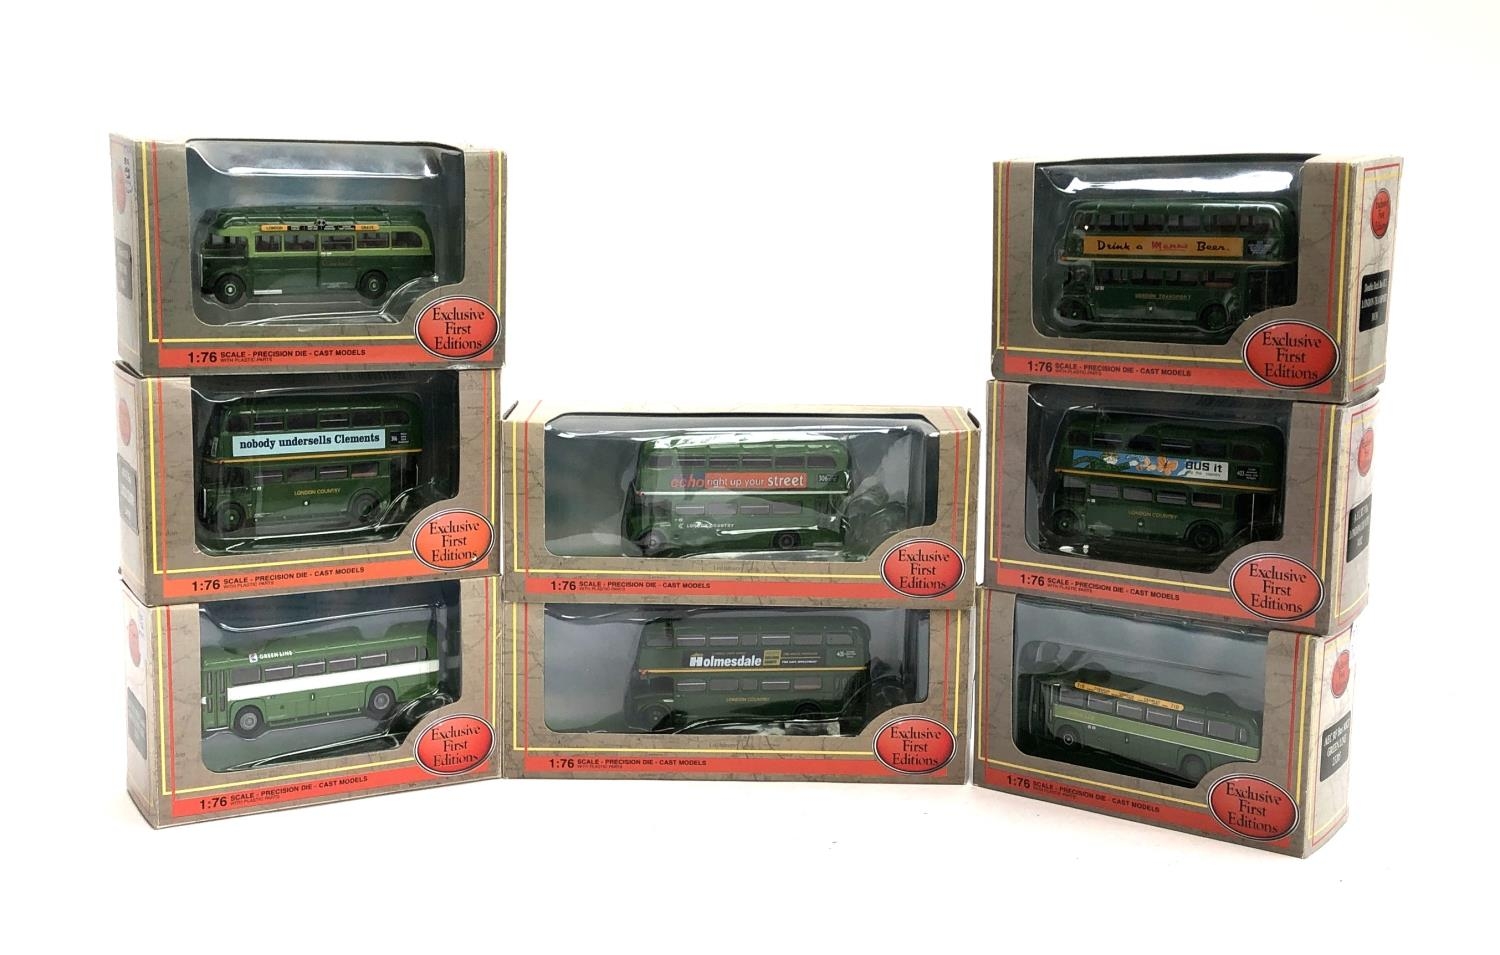 Eight Exclusive First Editions 1:76 scale London Transport and other London double and single decker